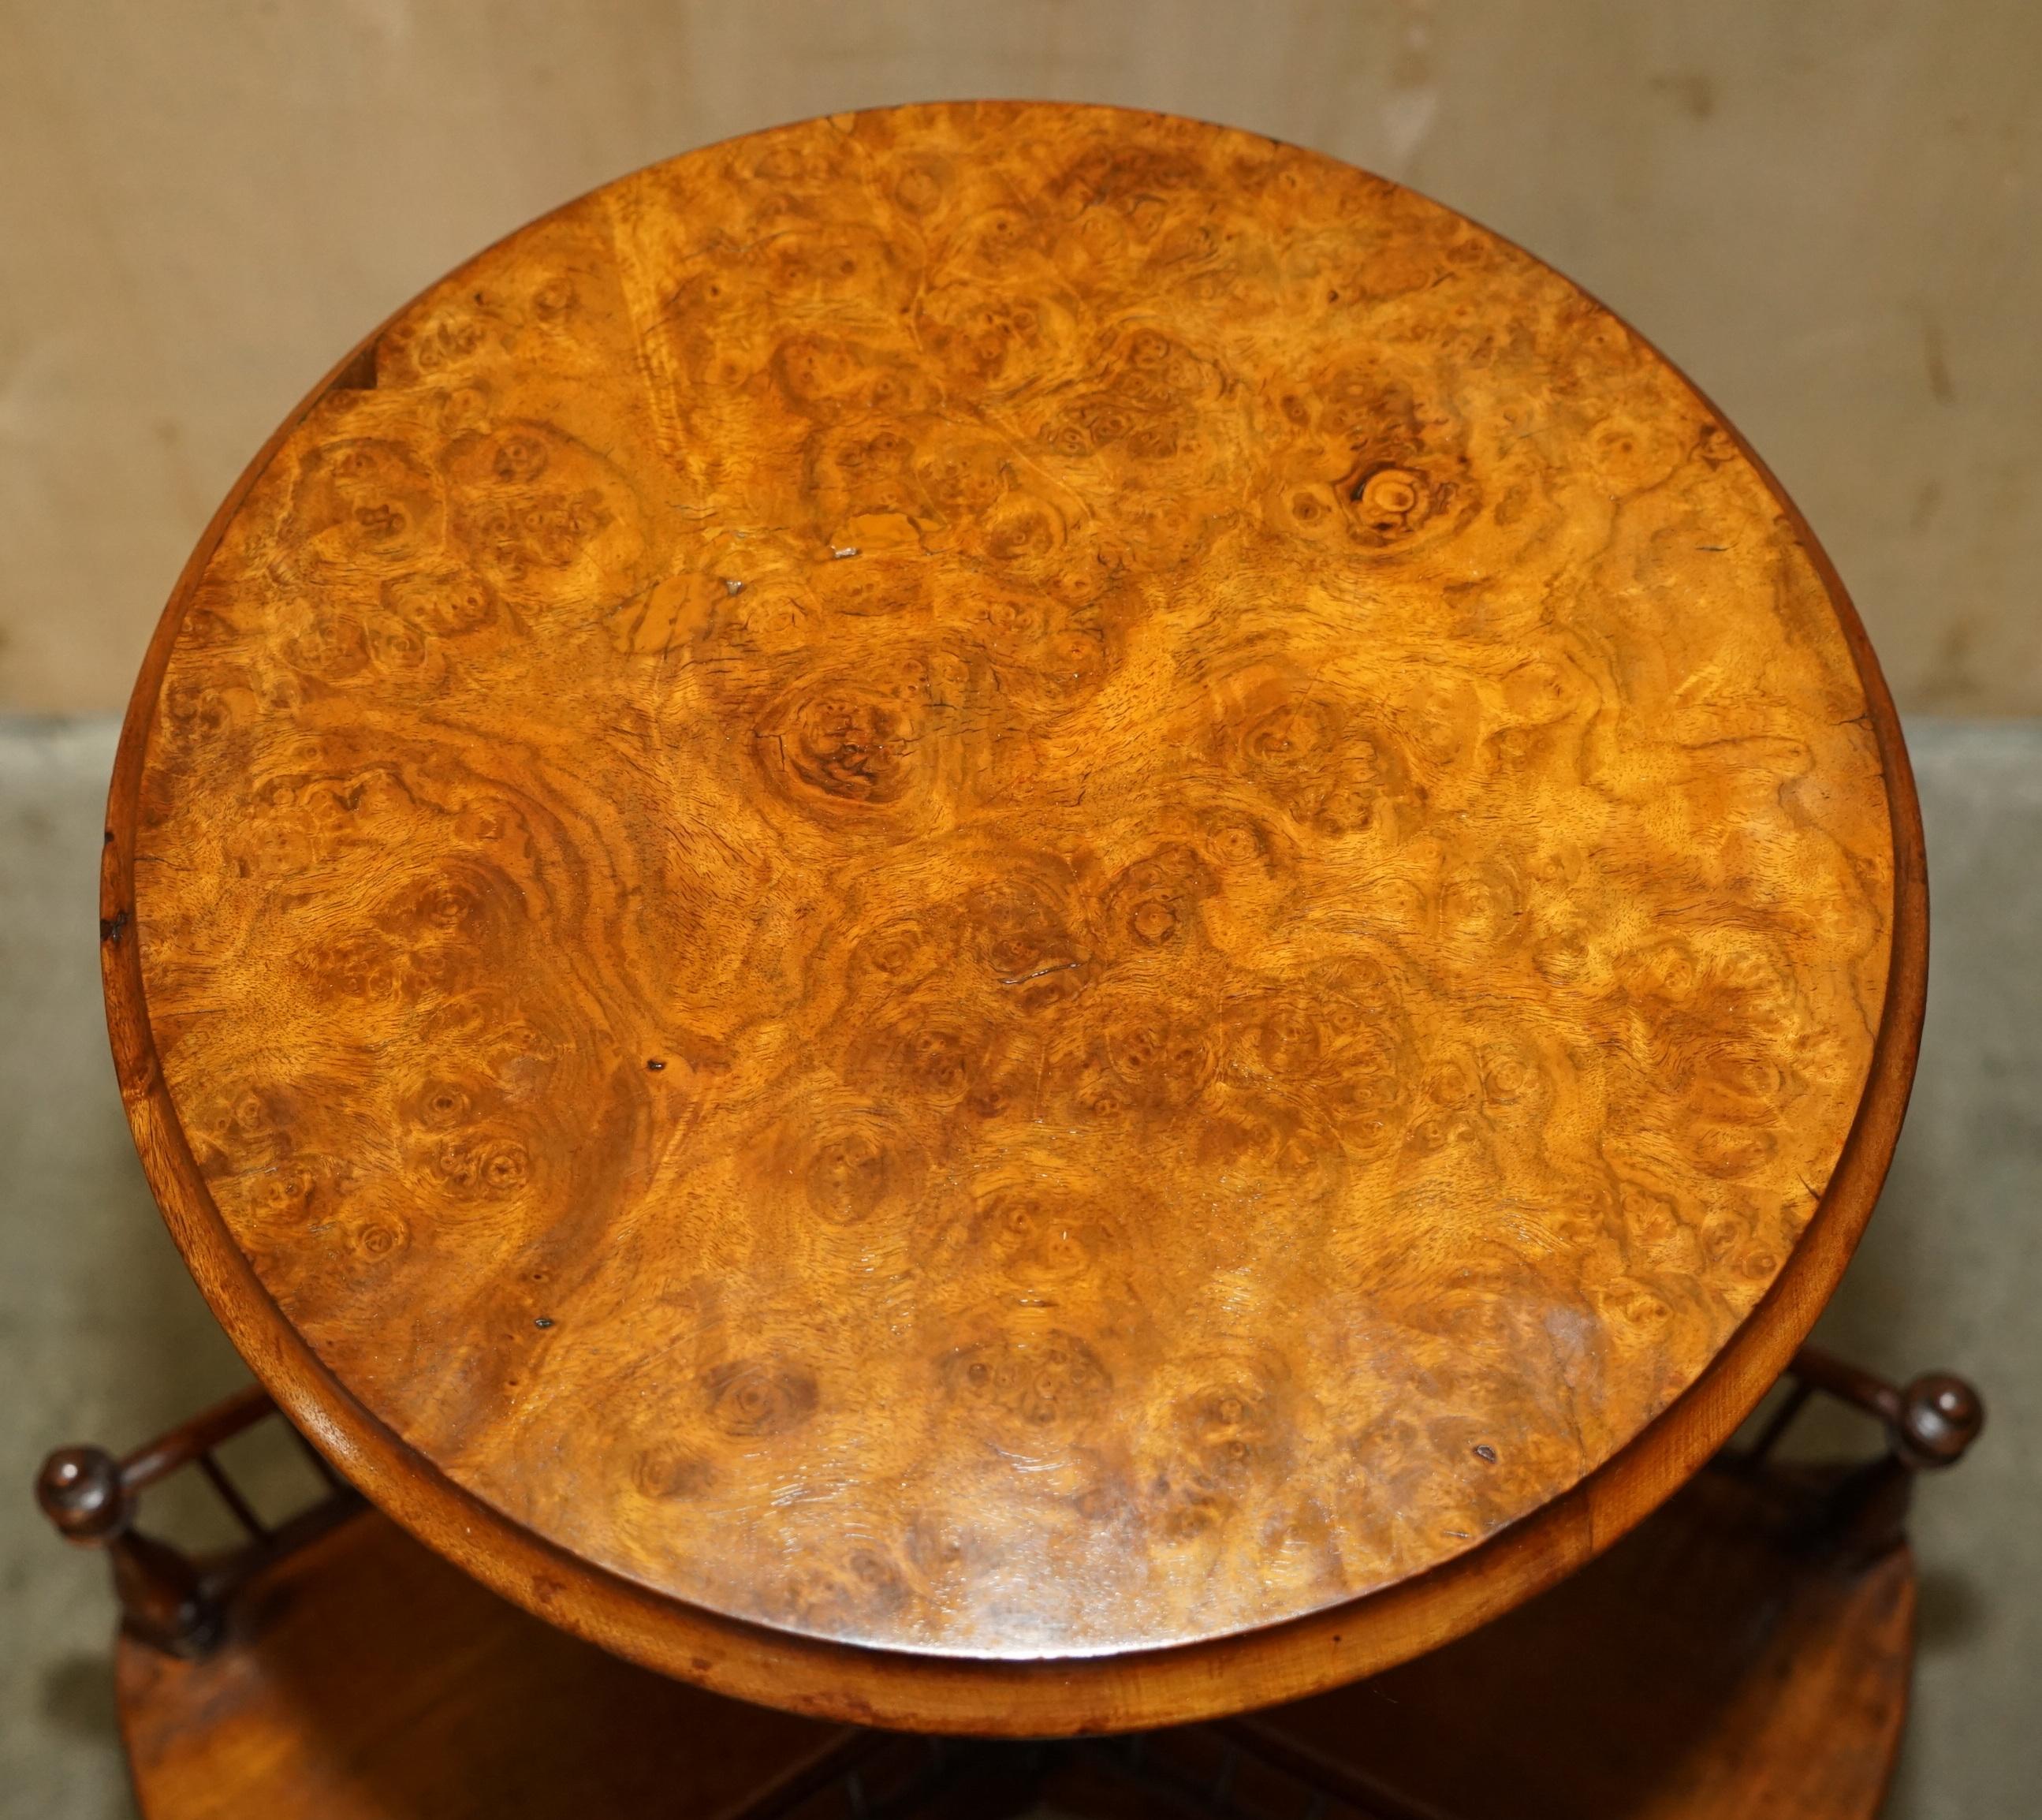 Royal House Antiques

Royal House Antiques is delighted to offer for sale this absolutely stunning, very unique, Burr Walnut revolving book table which has been fully restored 

Please note the delivery fee listed is just a guide, it covers within